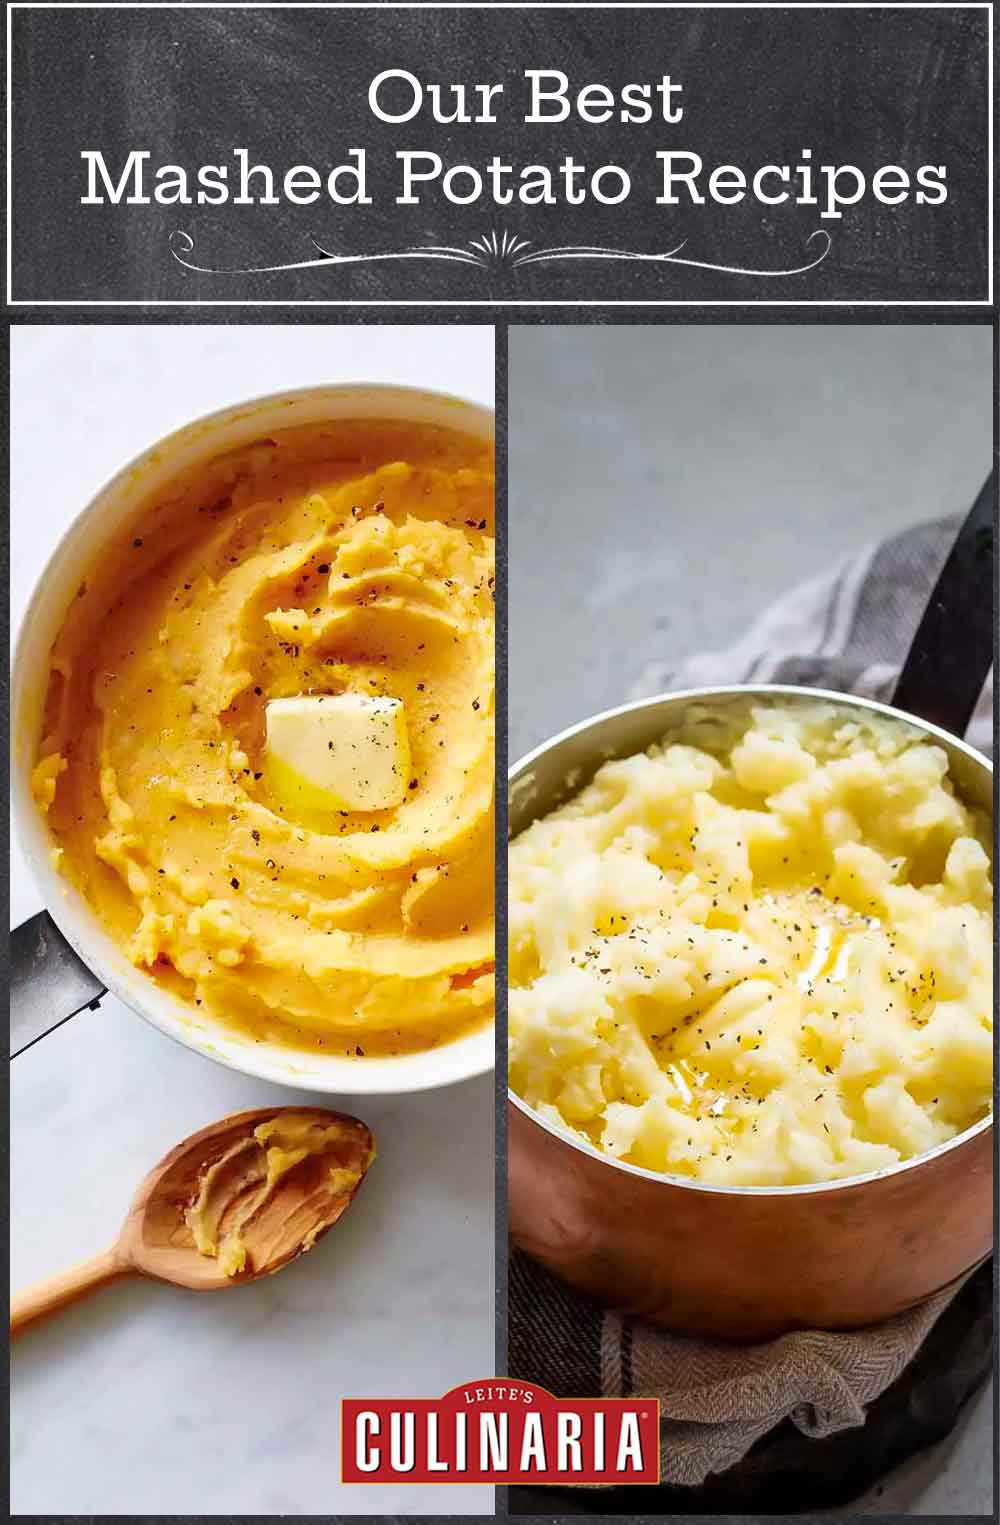 Images of two mashed potatoes recipes -- pumpkin mashed potatoes and garlic mashed potatoes.